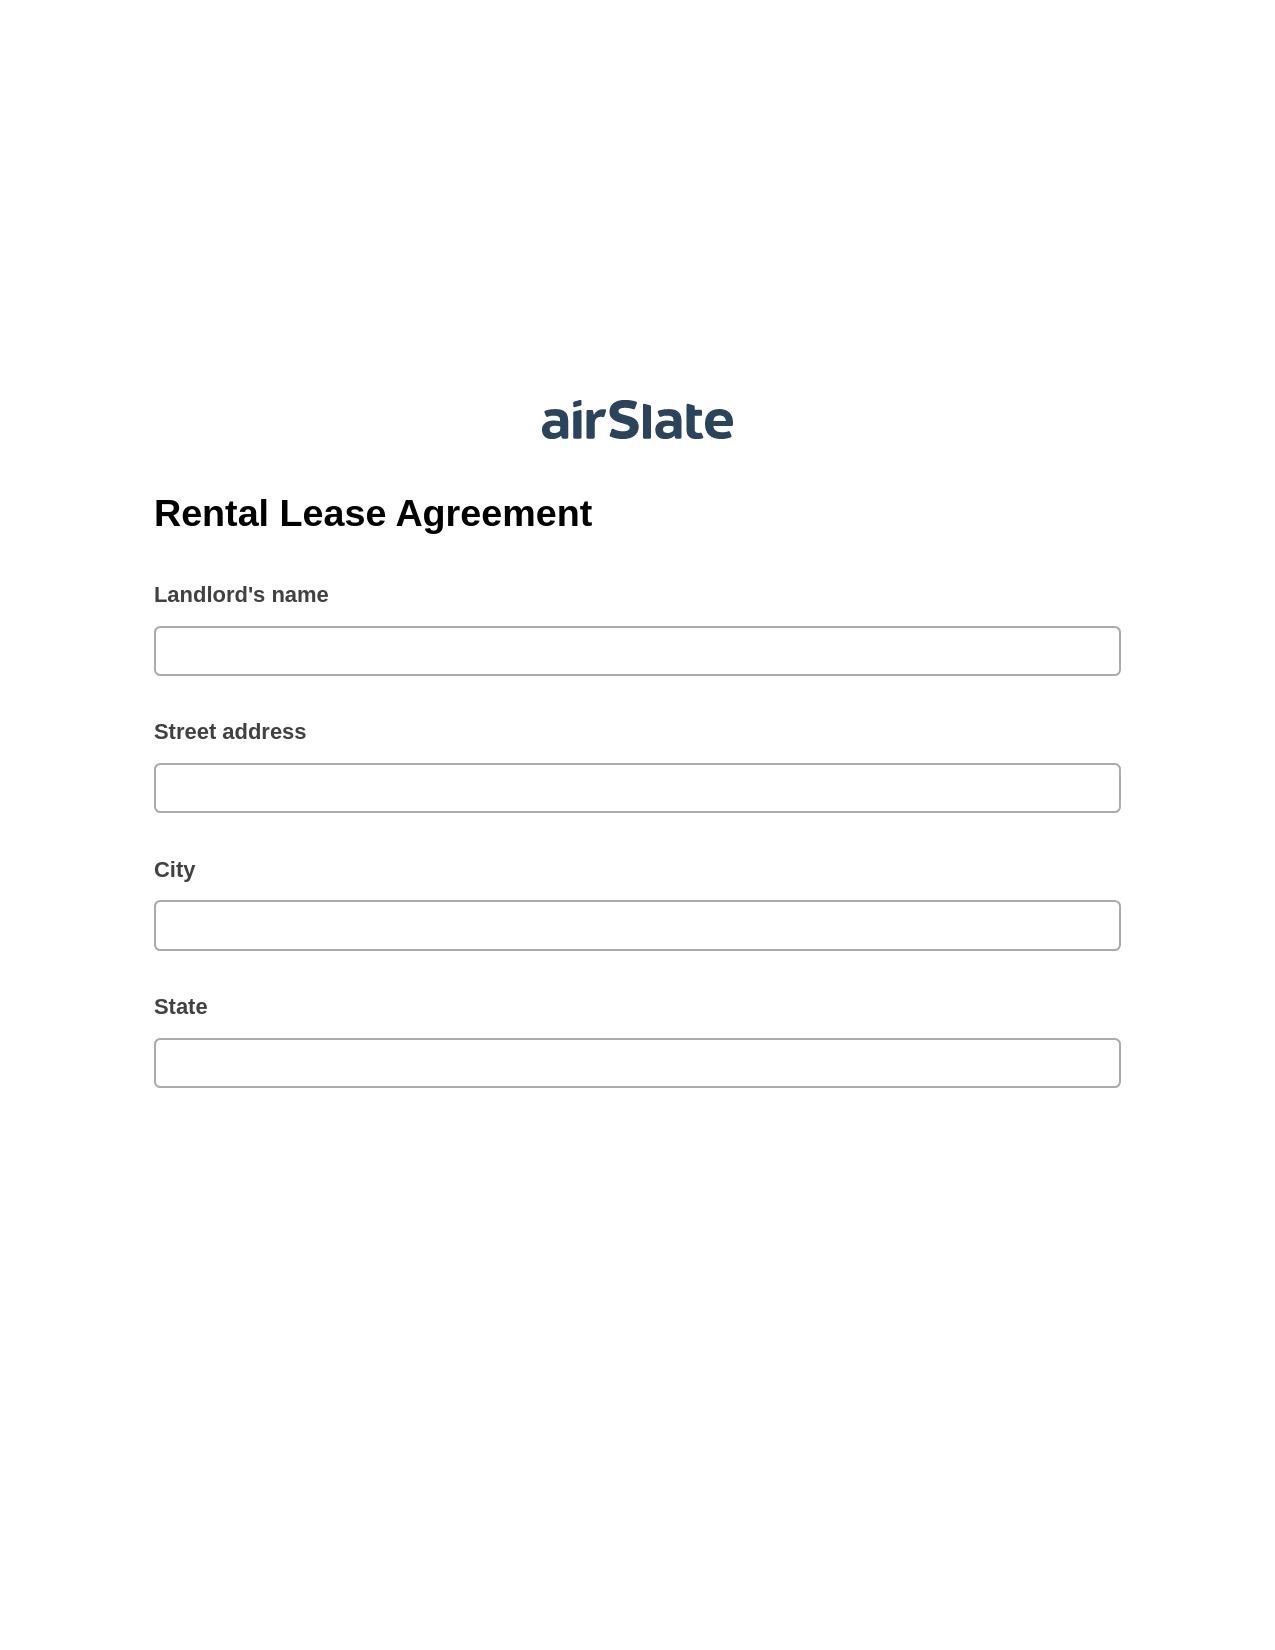 Rental Lease Agreement Pre-fill from CSV File Dropdown Options Bot, Invoke Salesforce Process Bot, Export to Excel 365 Bot